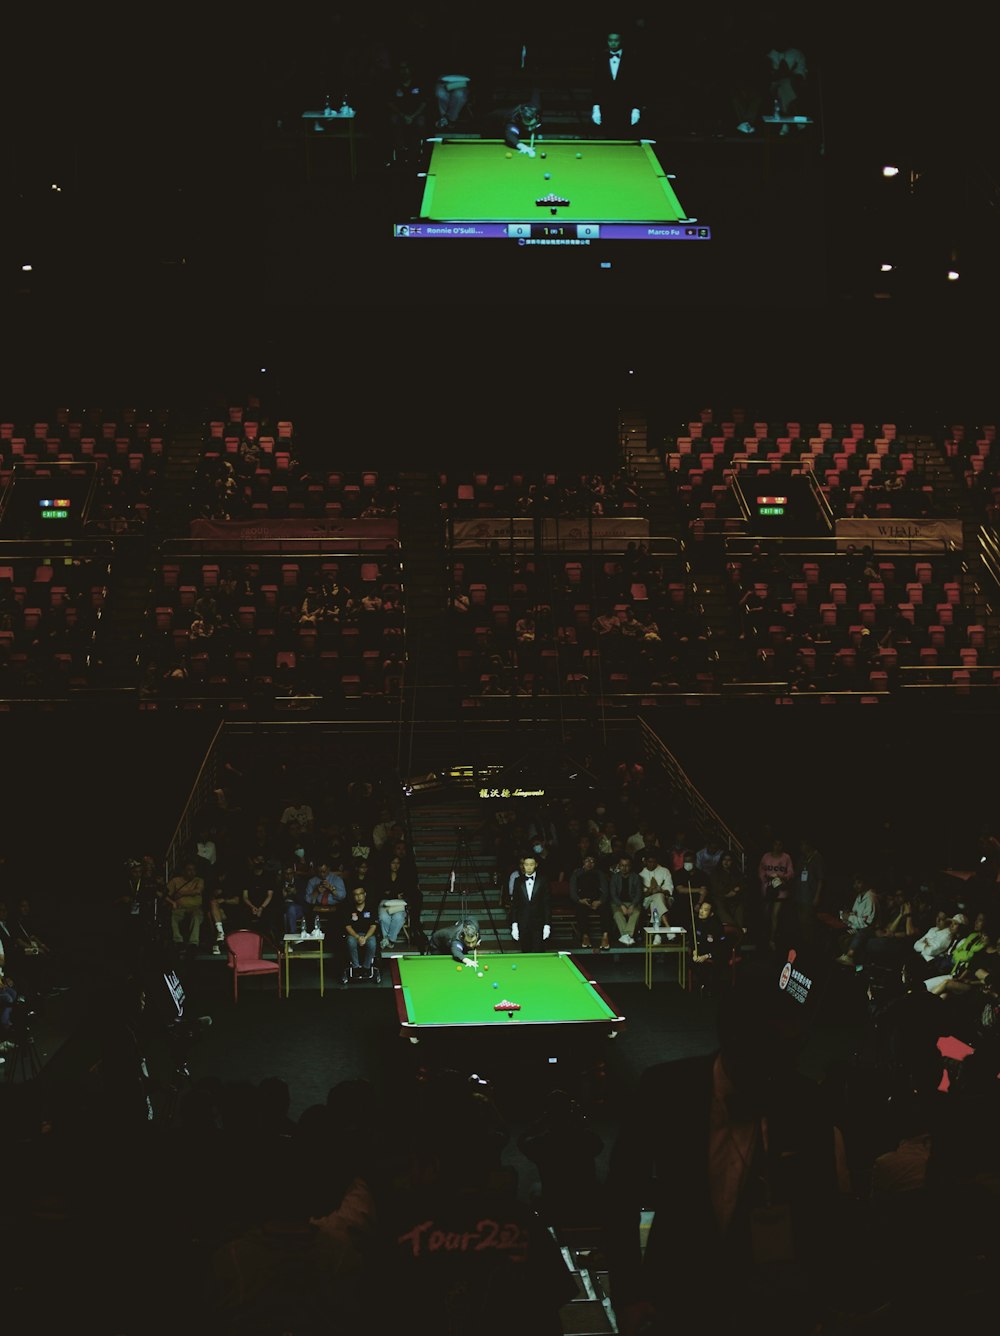 a tennis court with a green court in the middle of it